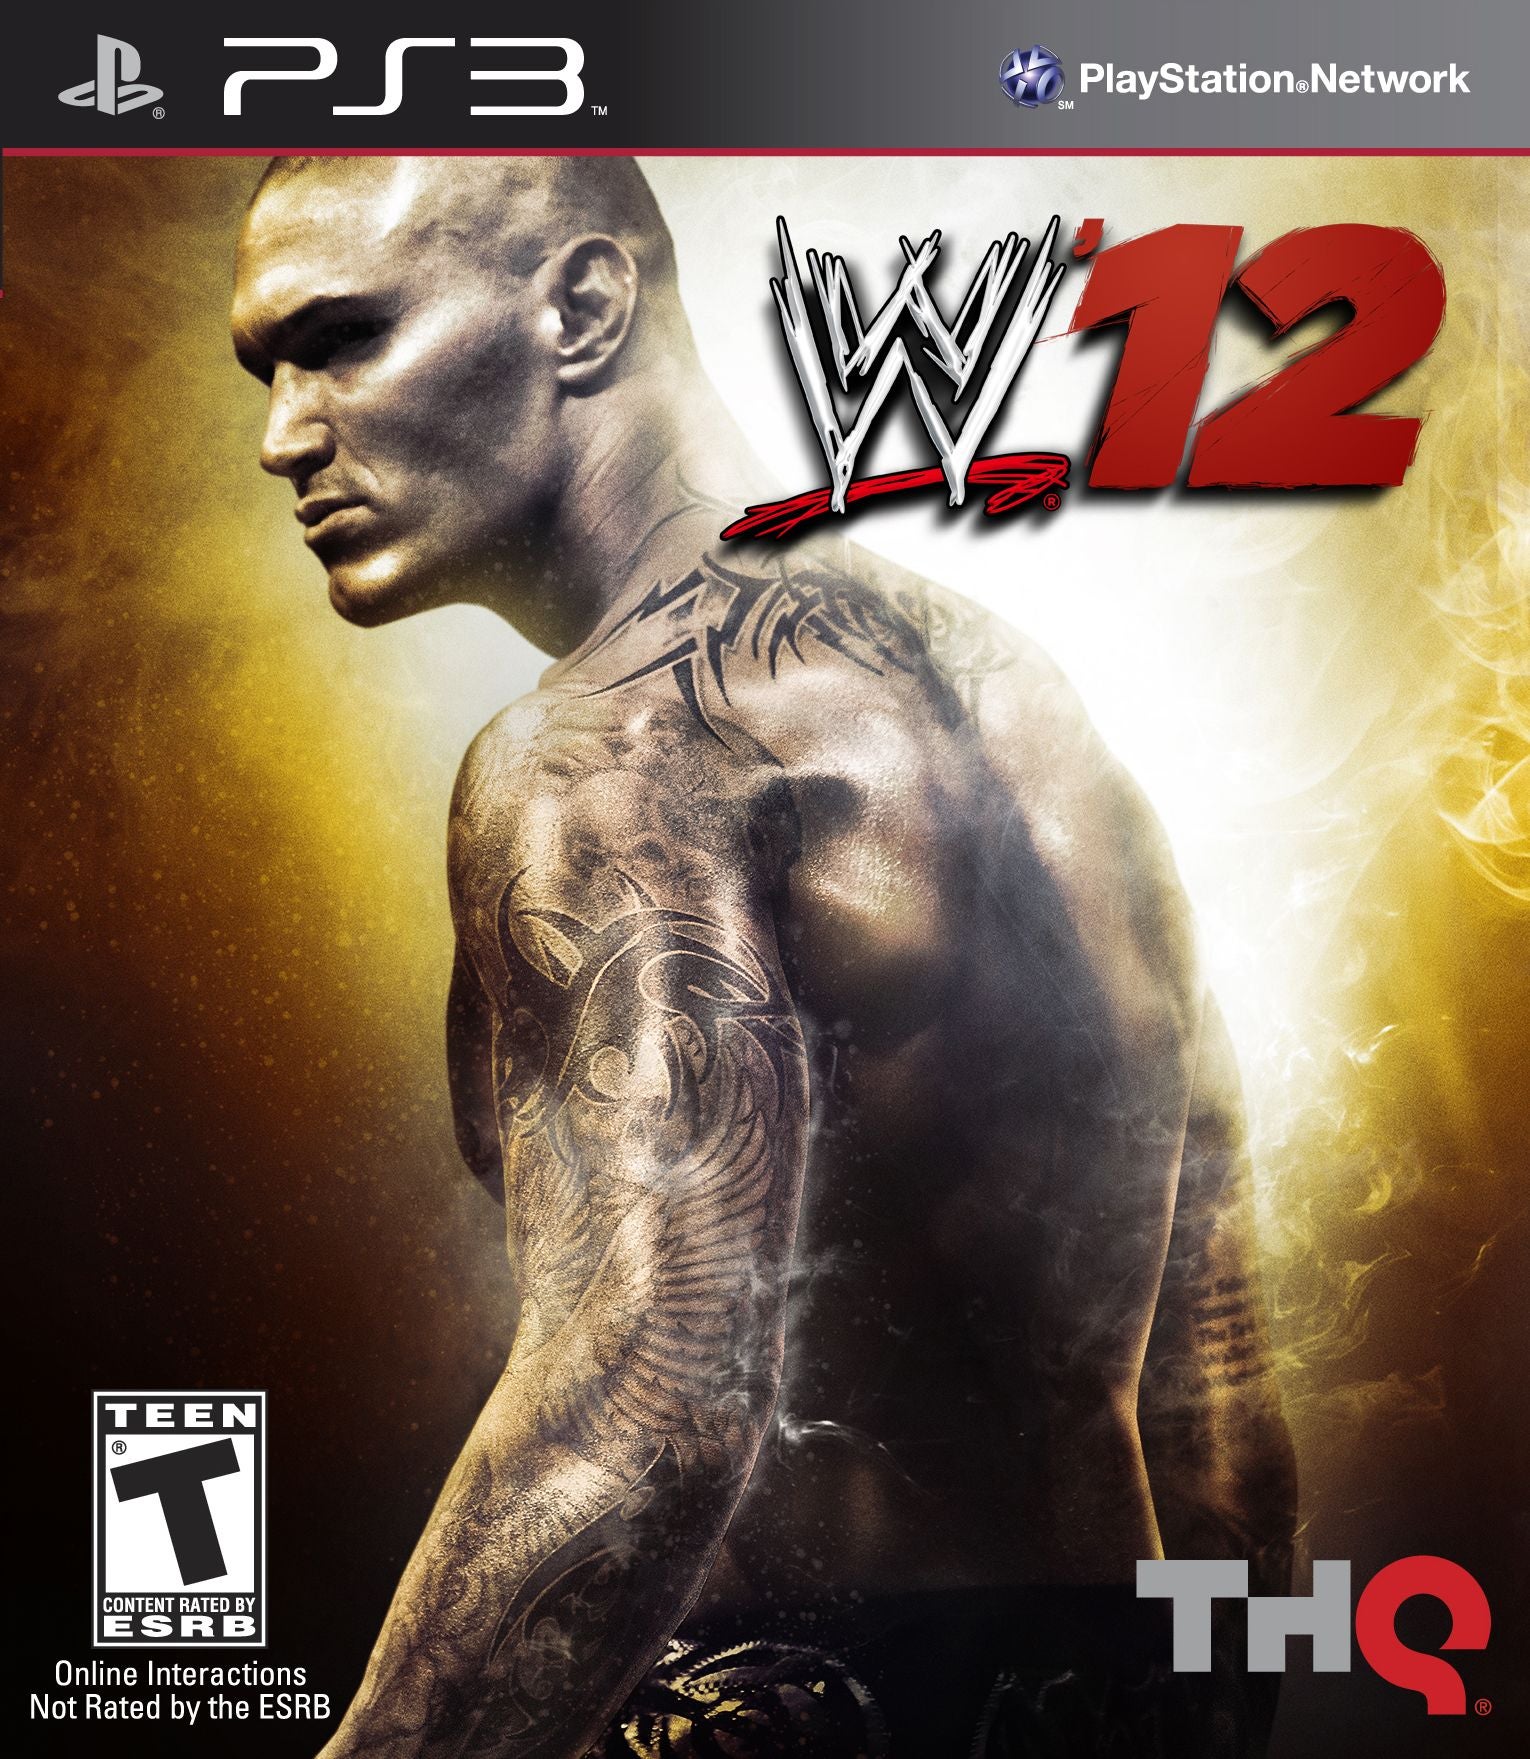 Download WWE 12 Game For PC